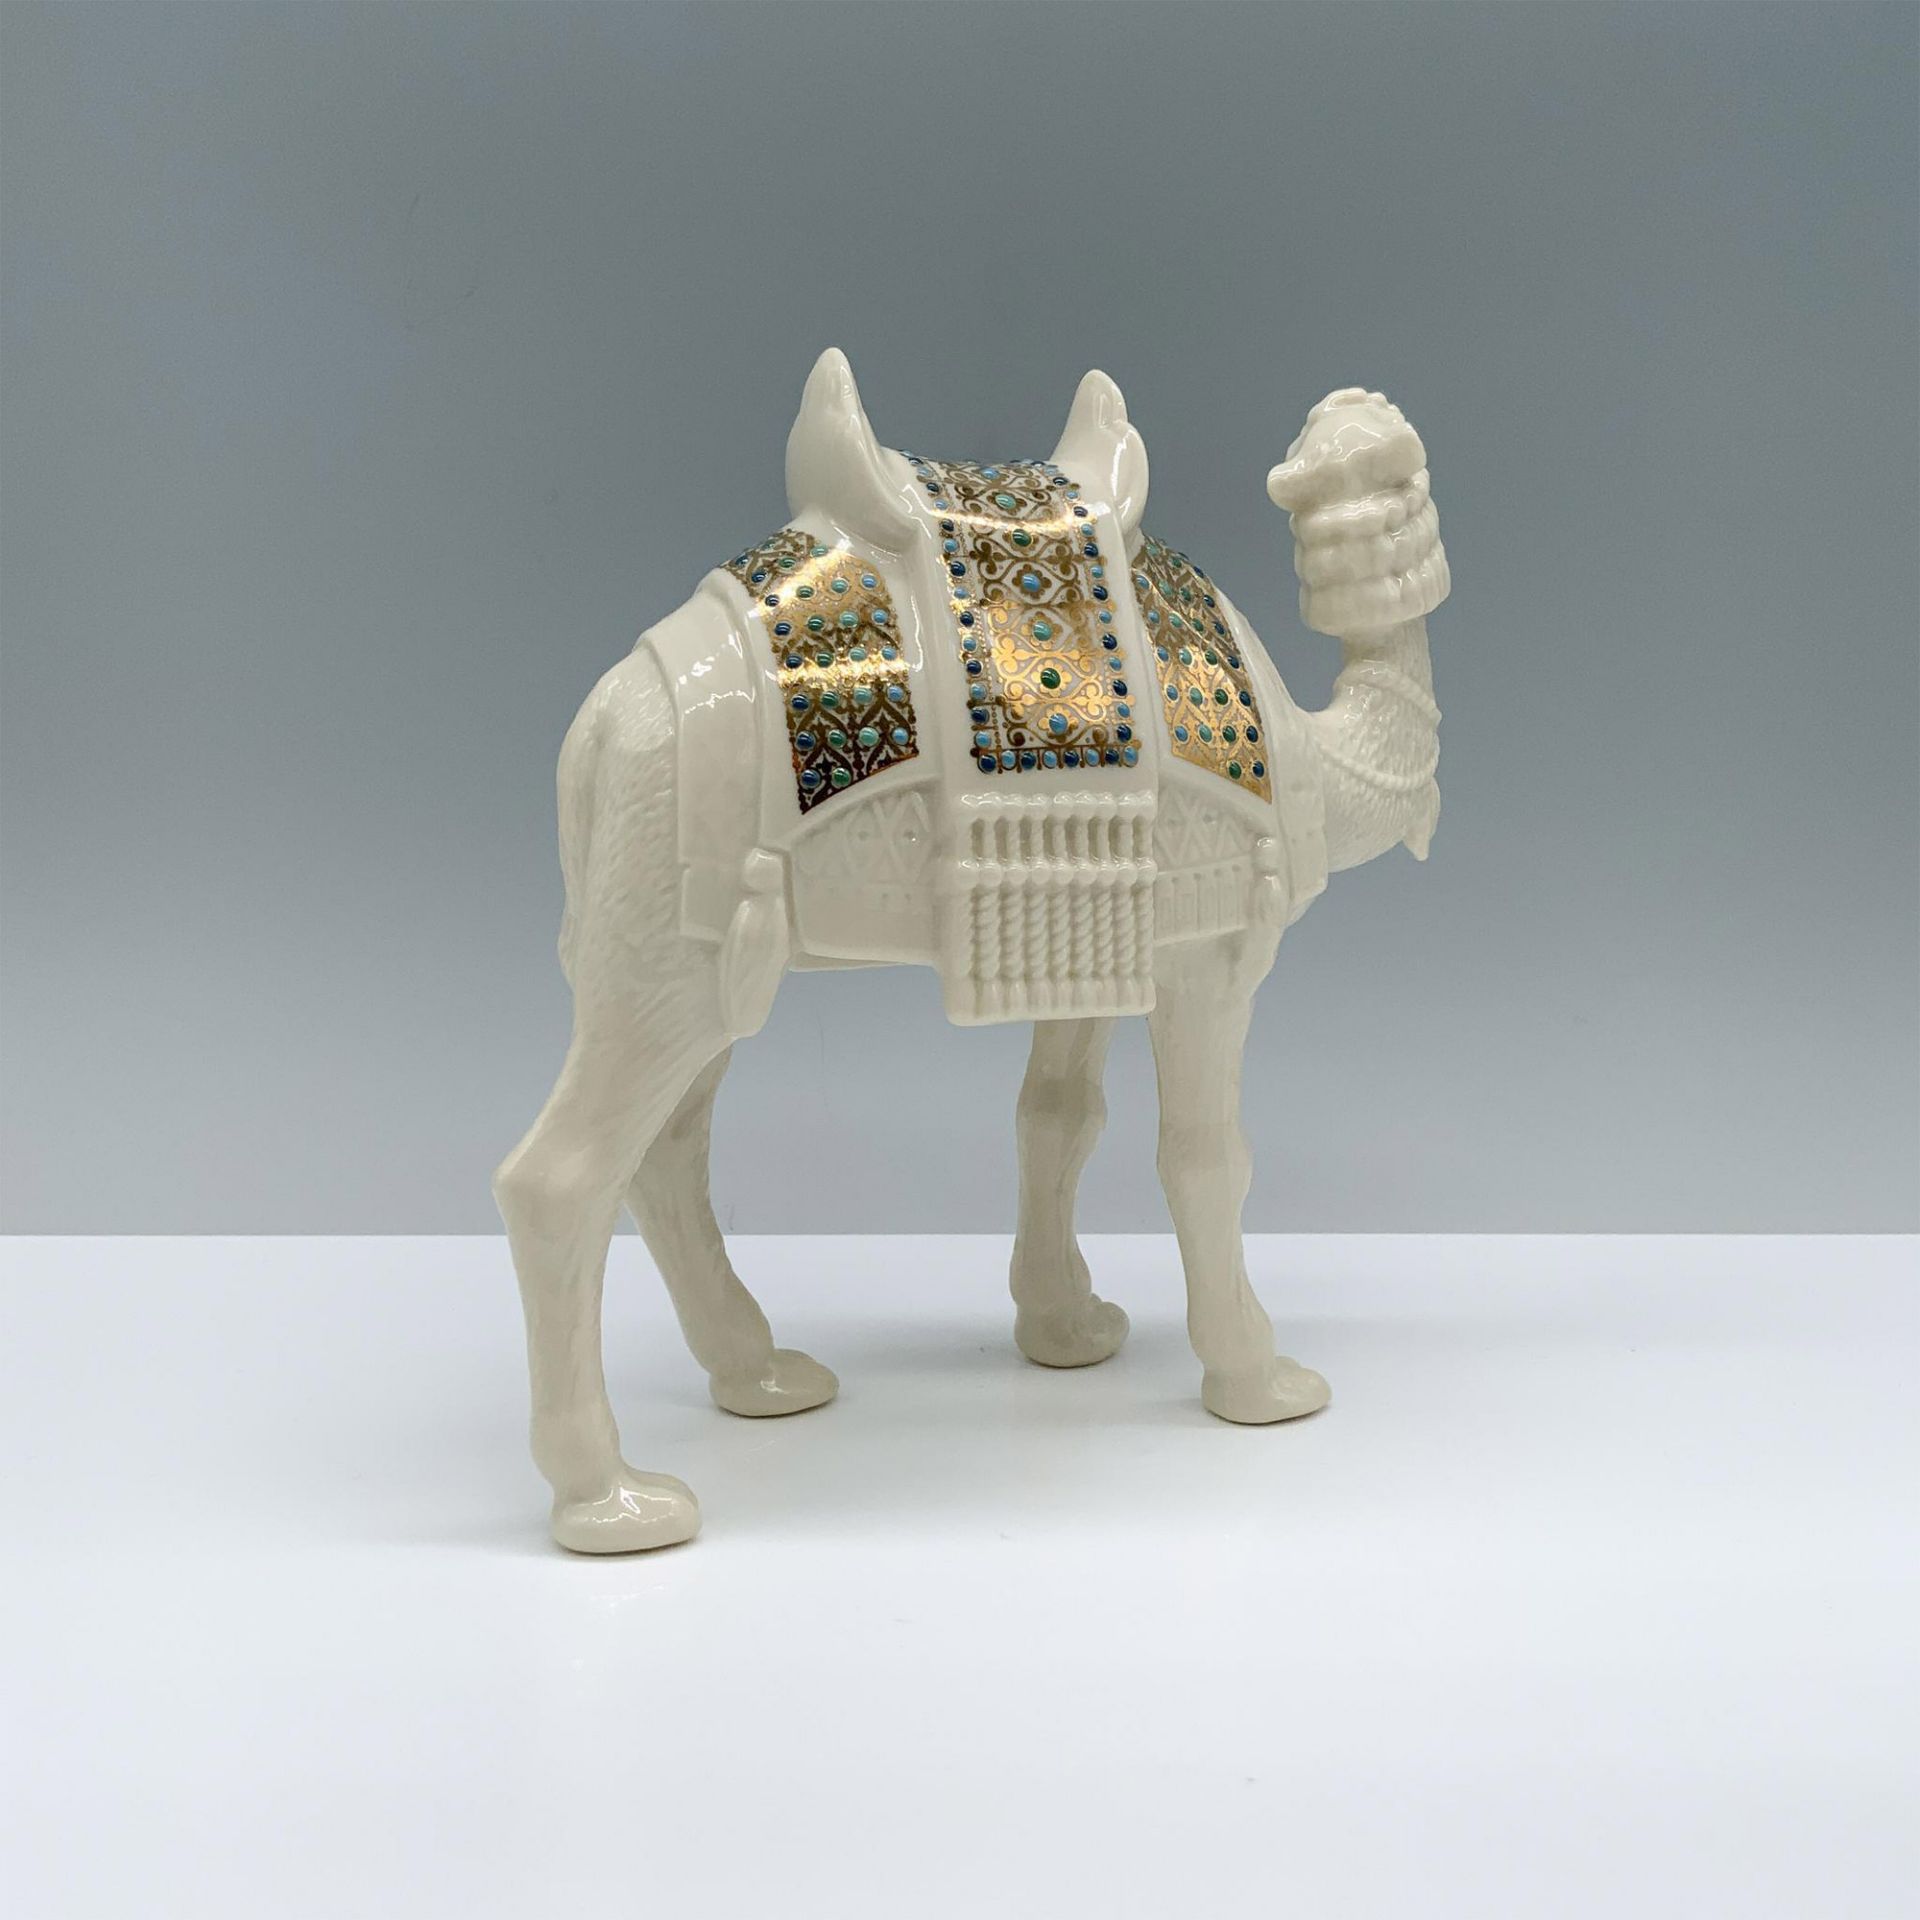 Lenox China Jewels Collection Figurine, Camel - Image 2 of 3